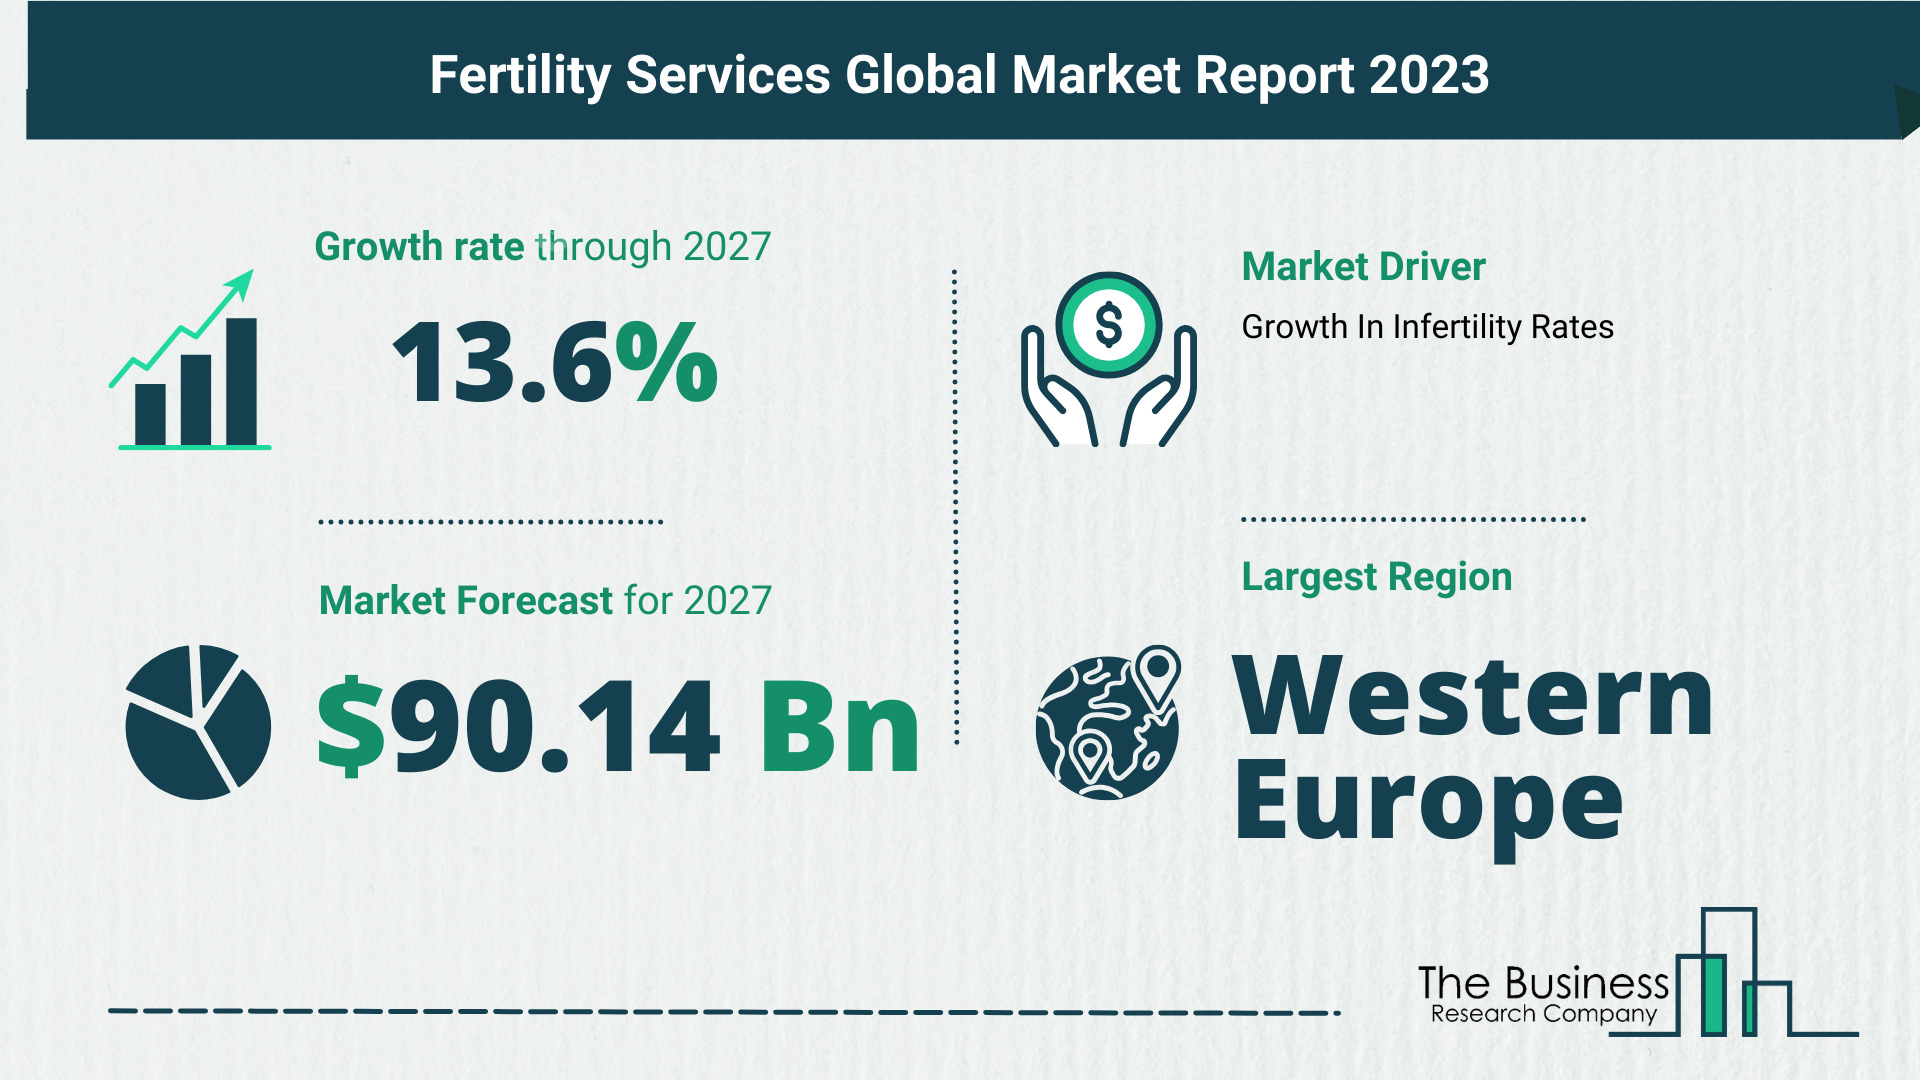 How Is The Fertility Services Market Expected To Grow Through 2023-2032